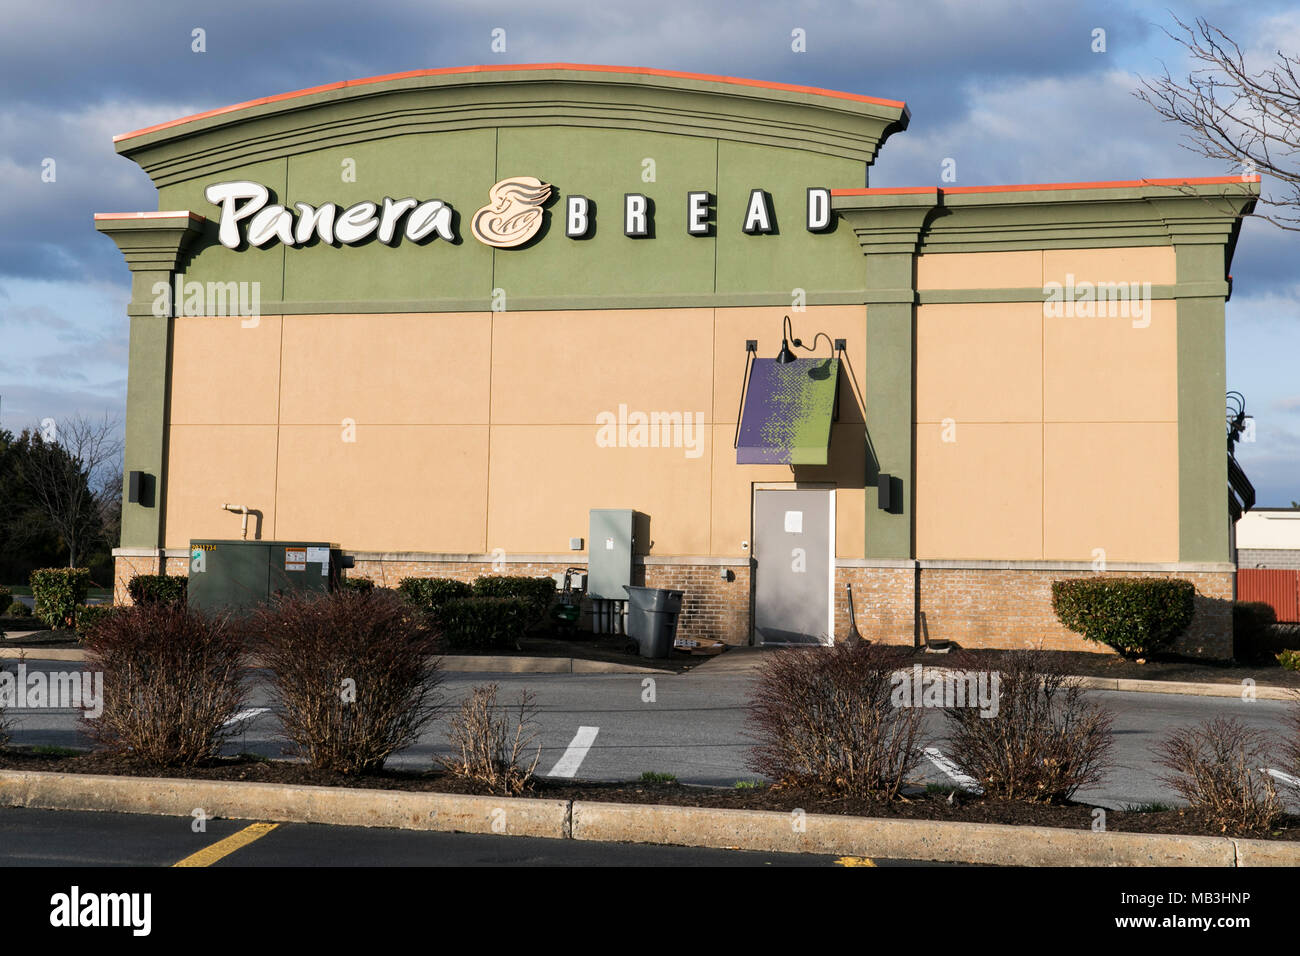 A Panera Bread casual dining restaurant location in Hagerstown, Maryland on April 5, 2018. Stock Photo